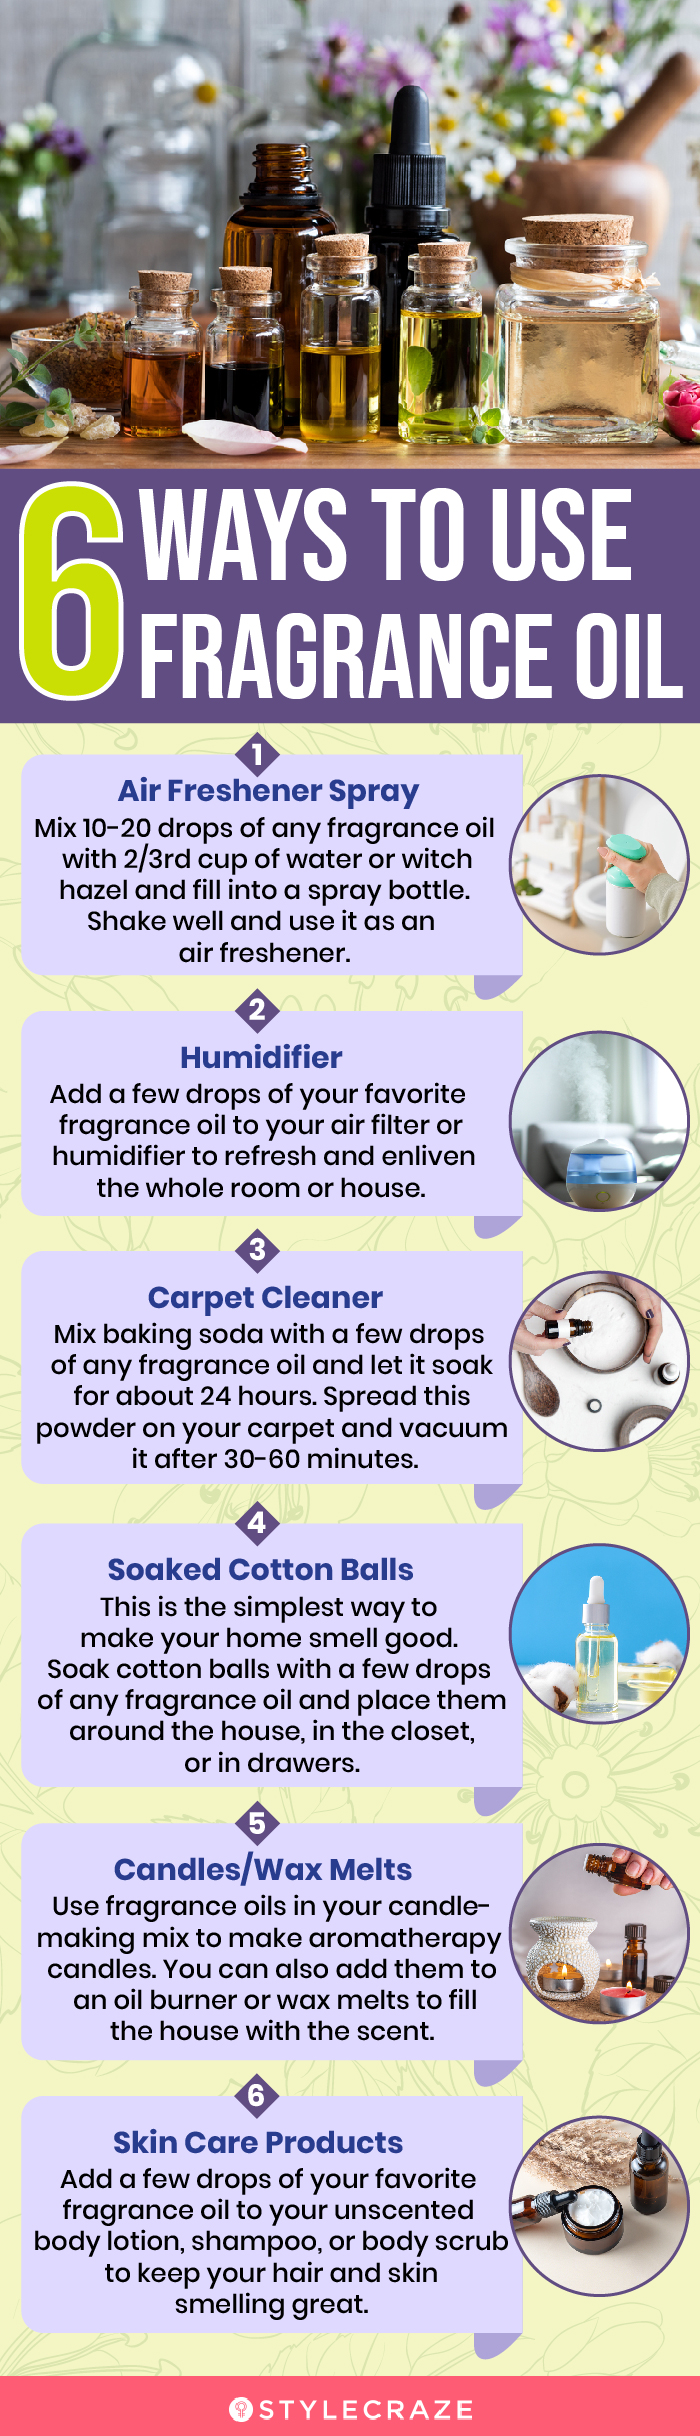 6 ways to use fragrance oil (infographic)